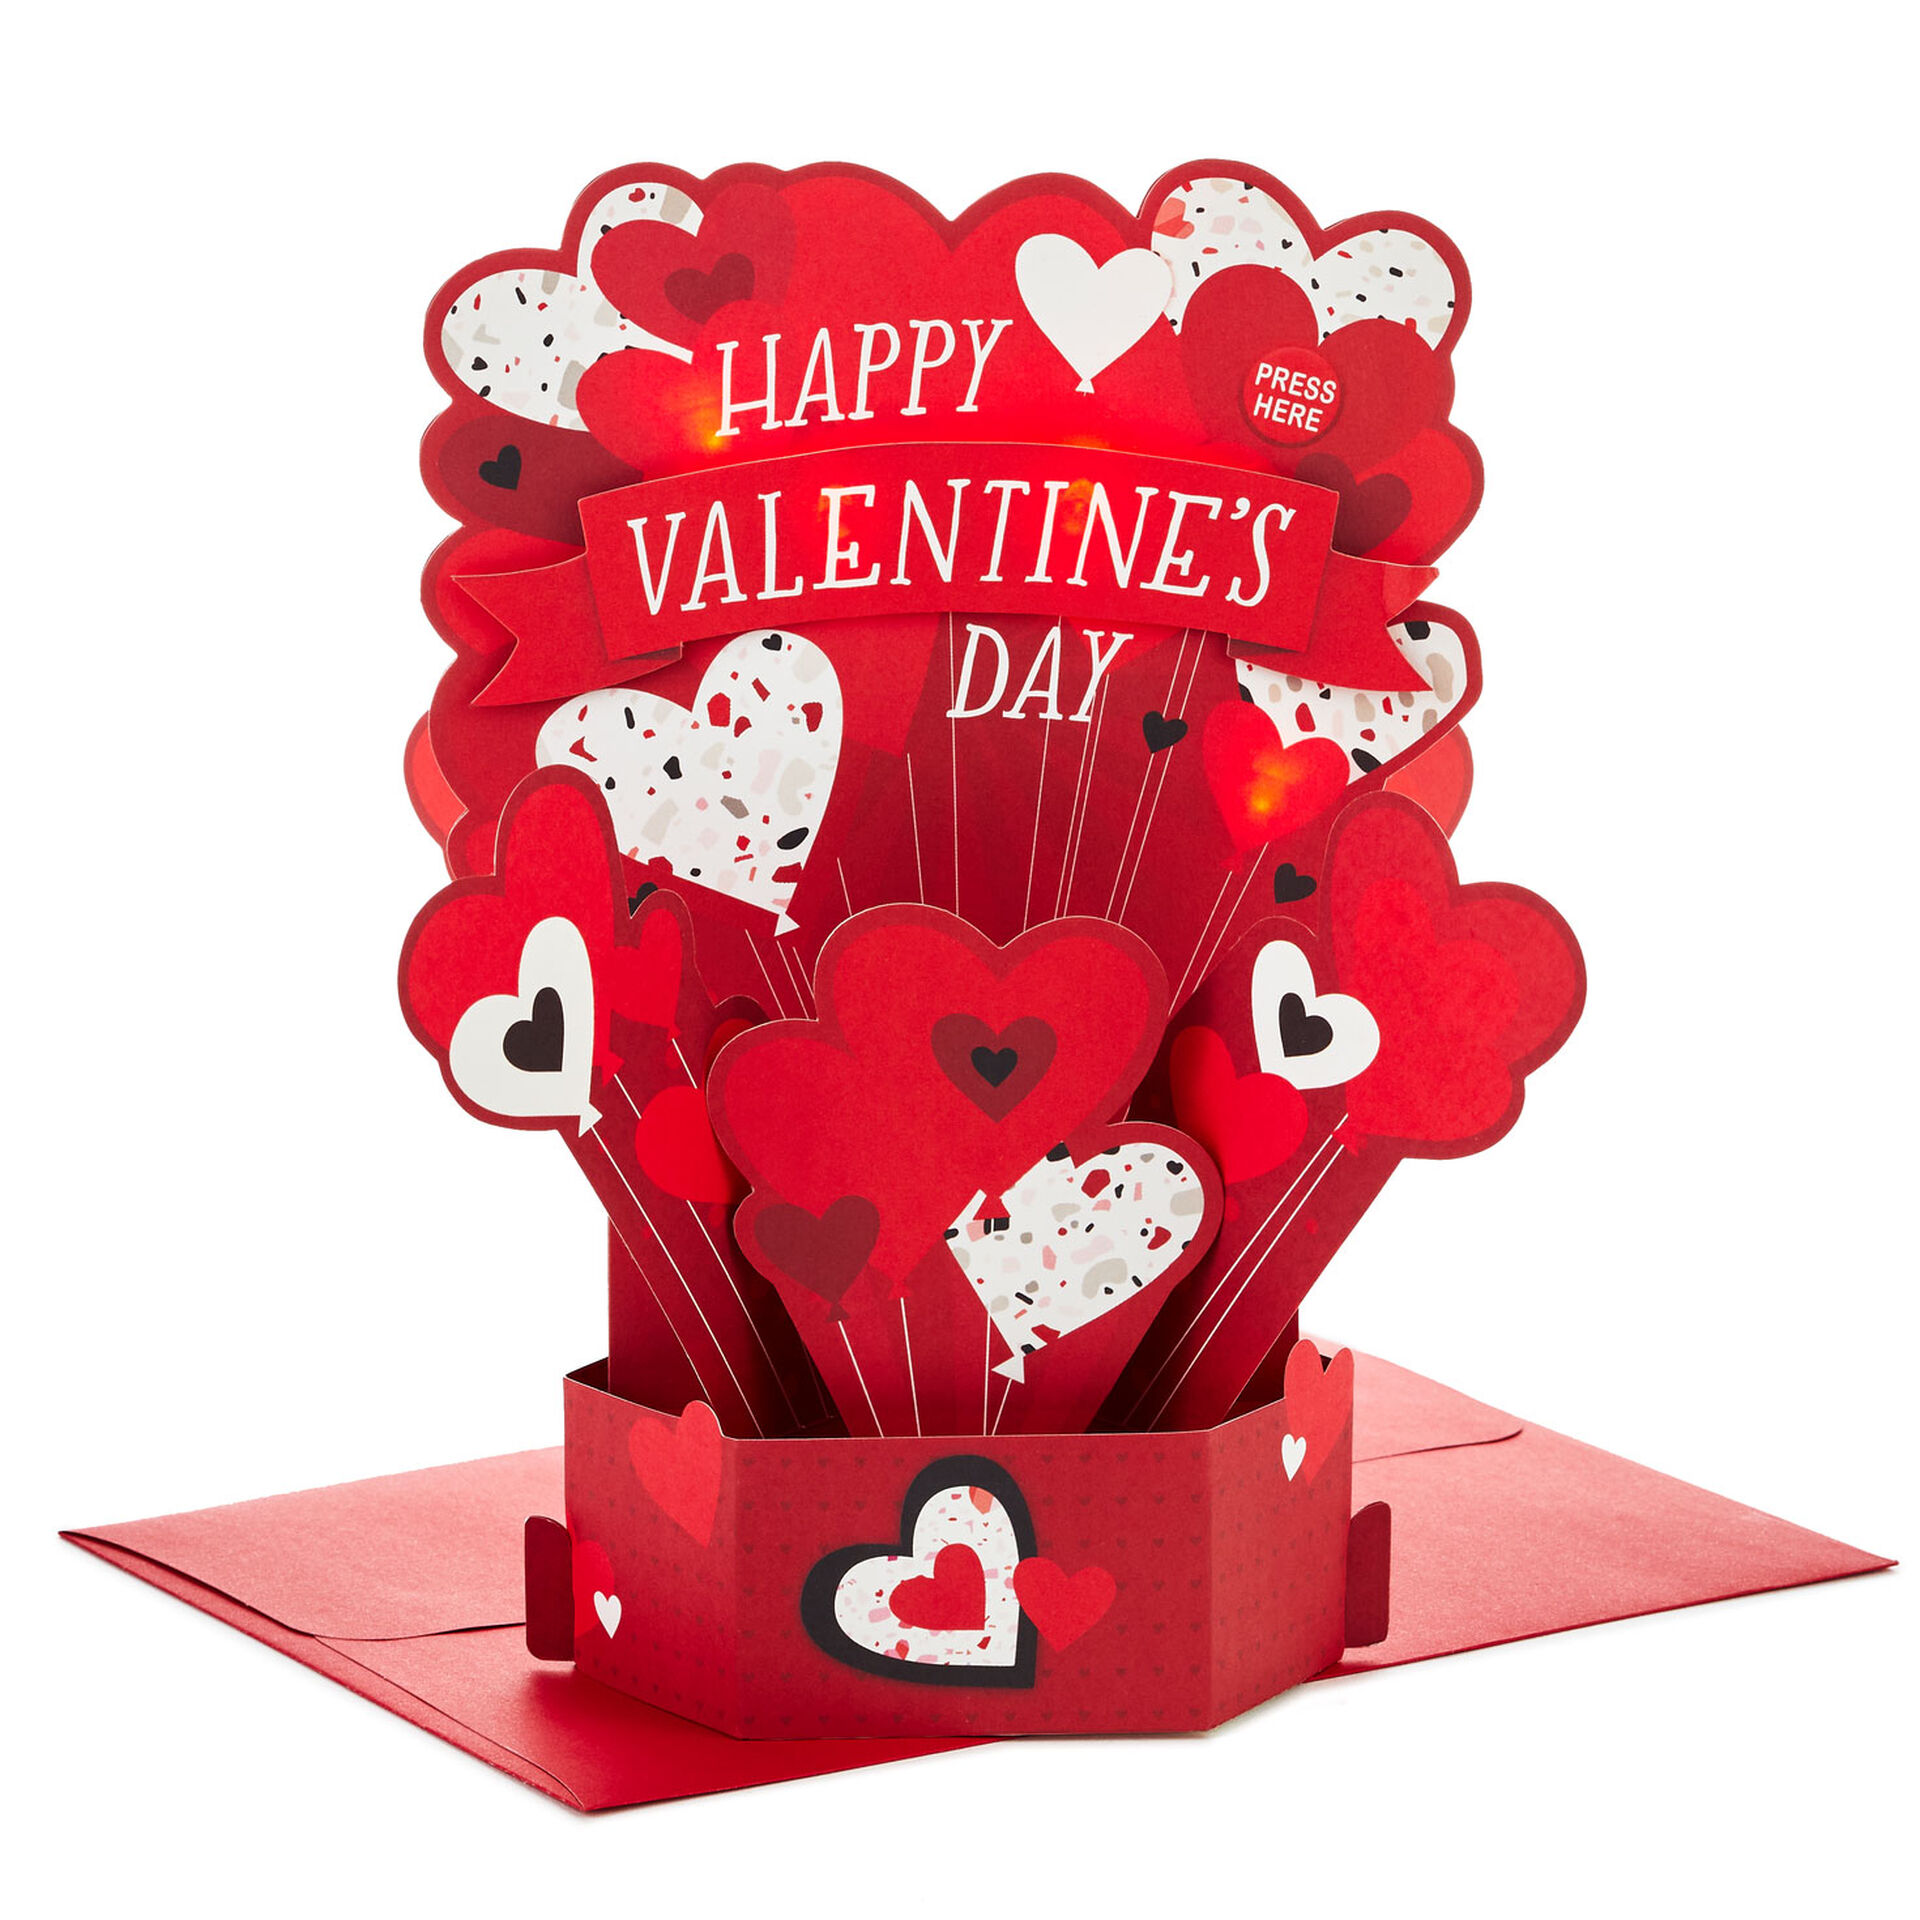 heart-balloons-musical-3d-pop-up-valentine-s-day-card-with-light